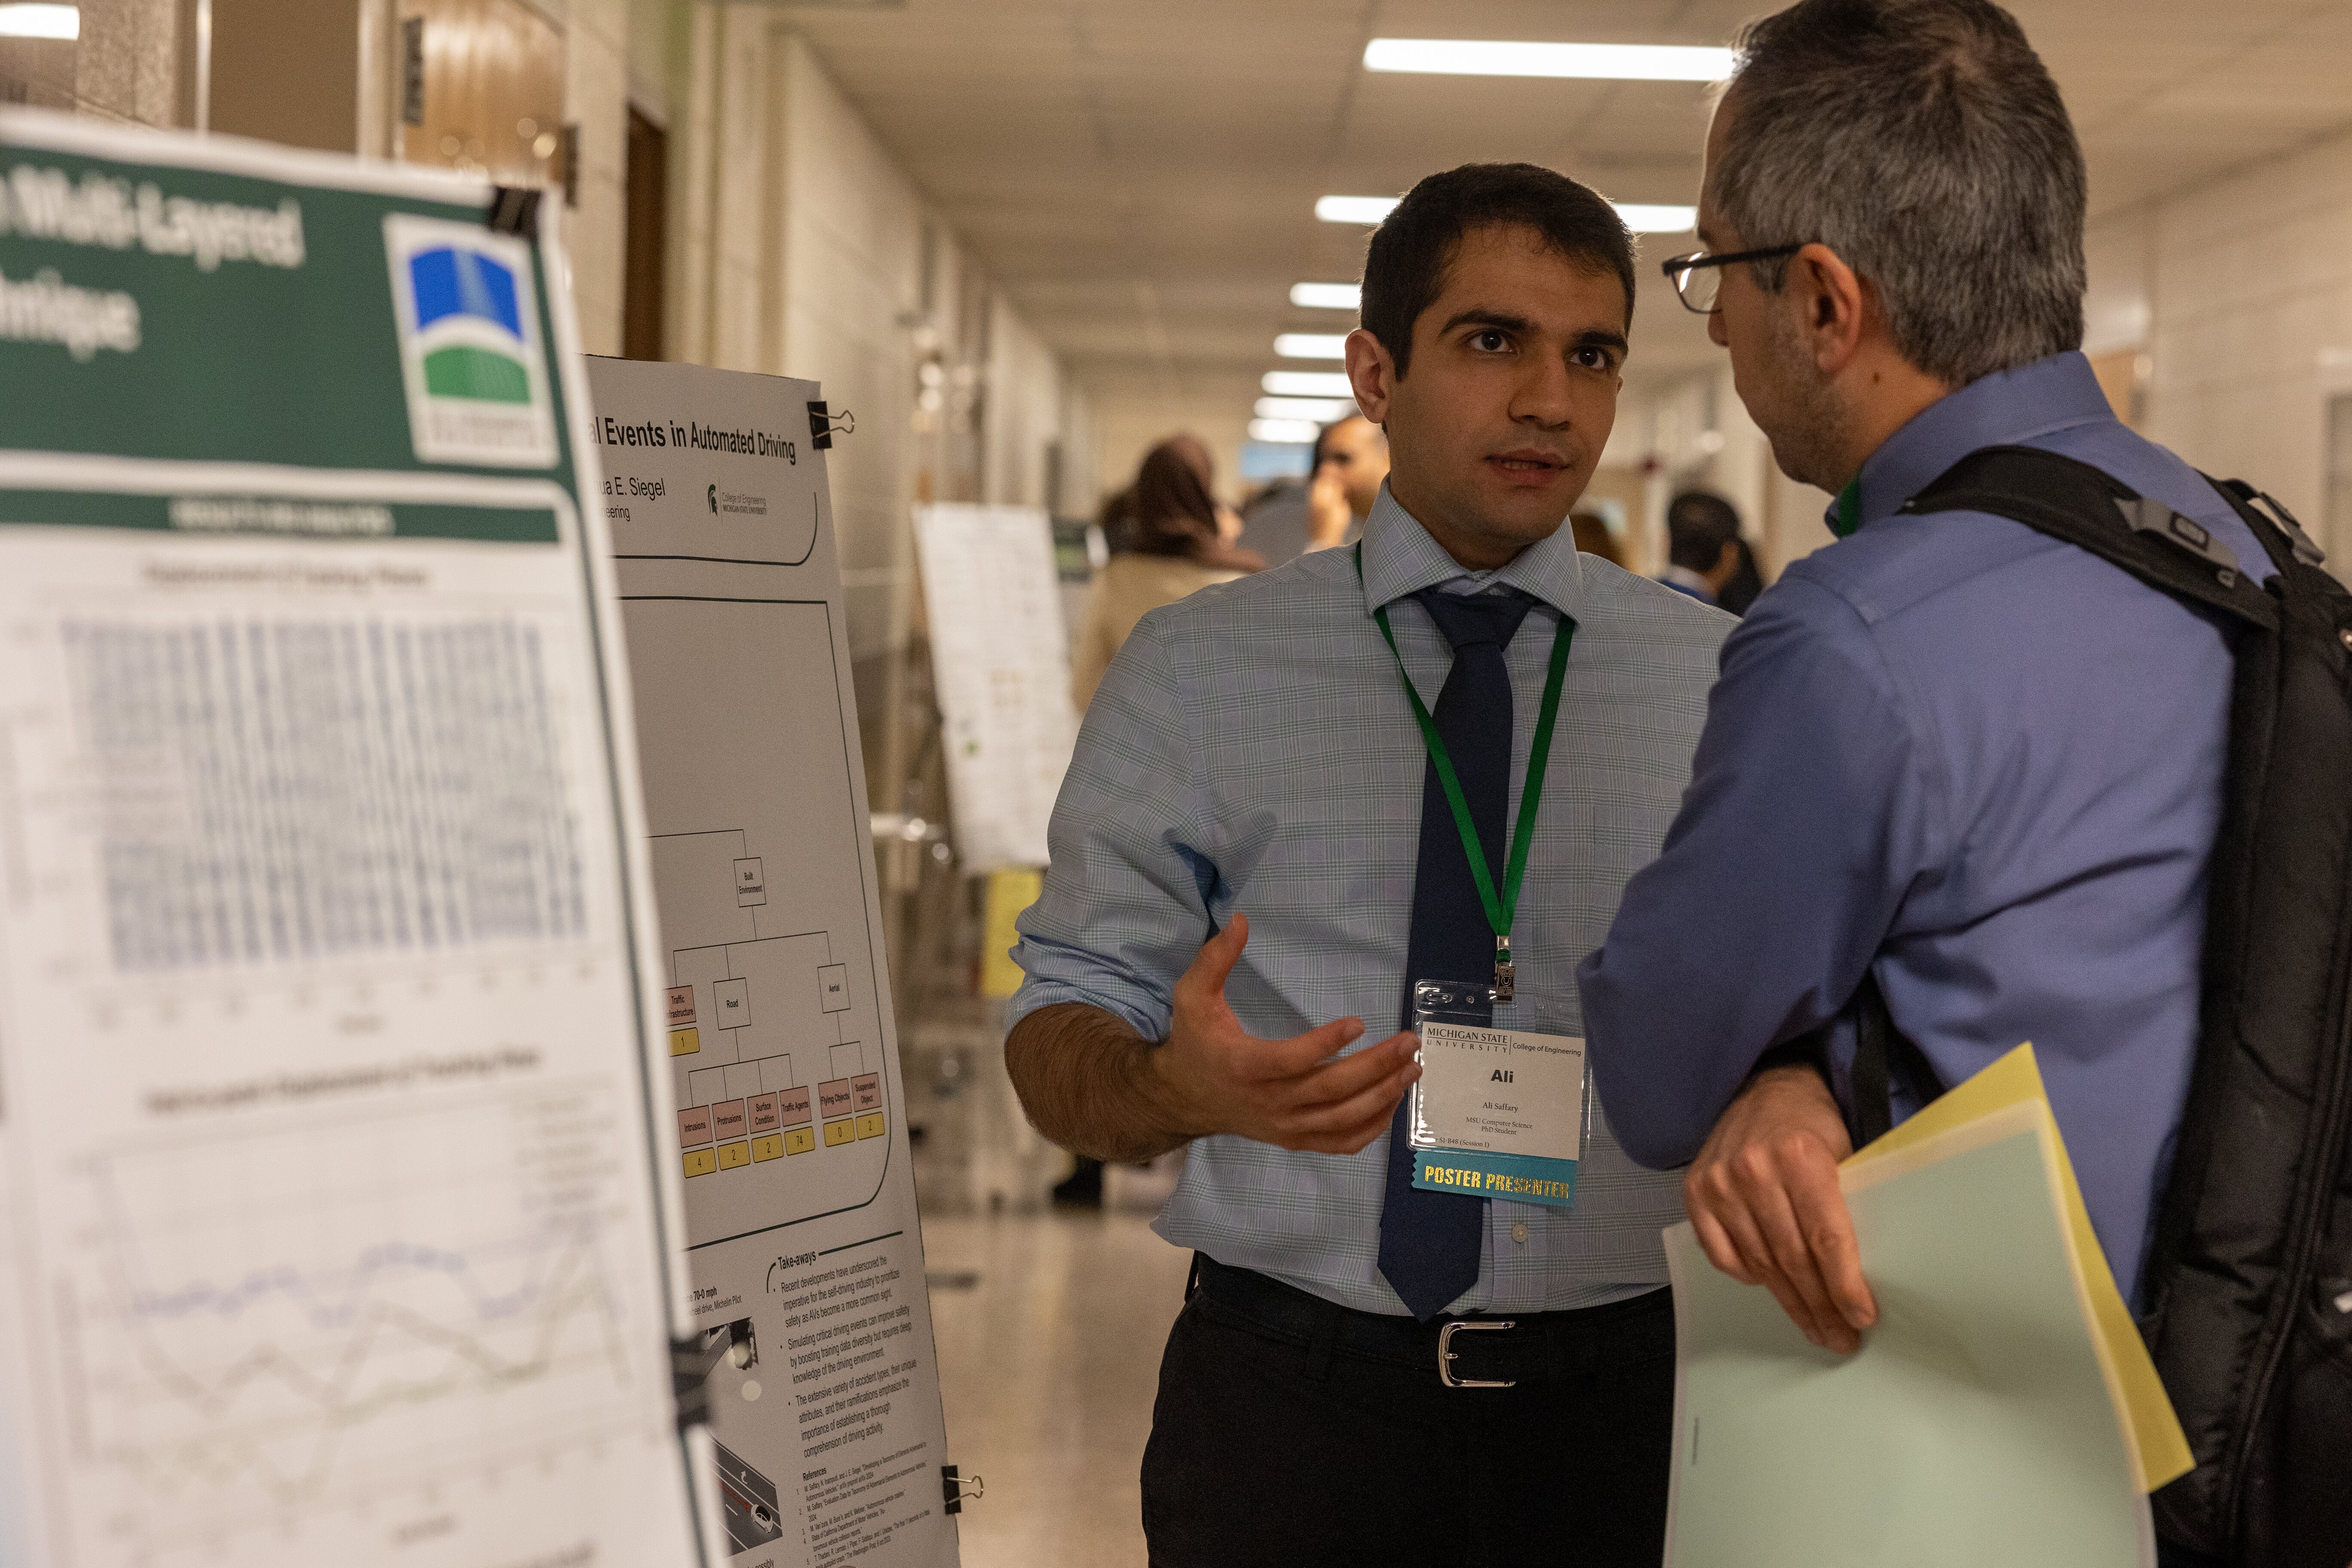 Student presenting their poster to a faculty member